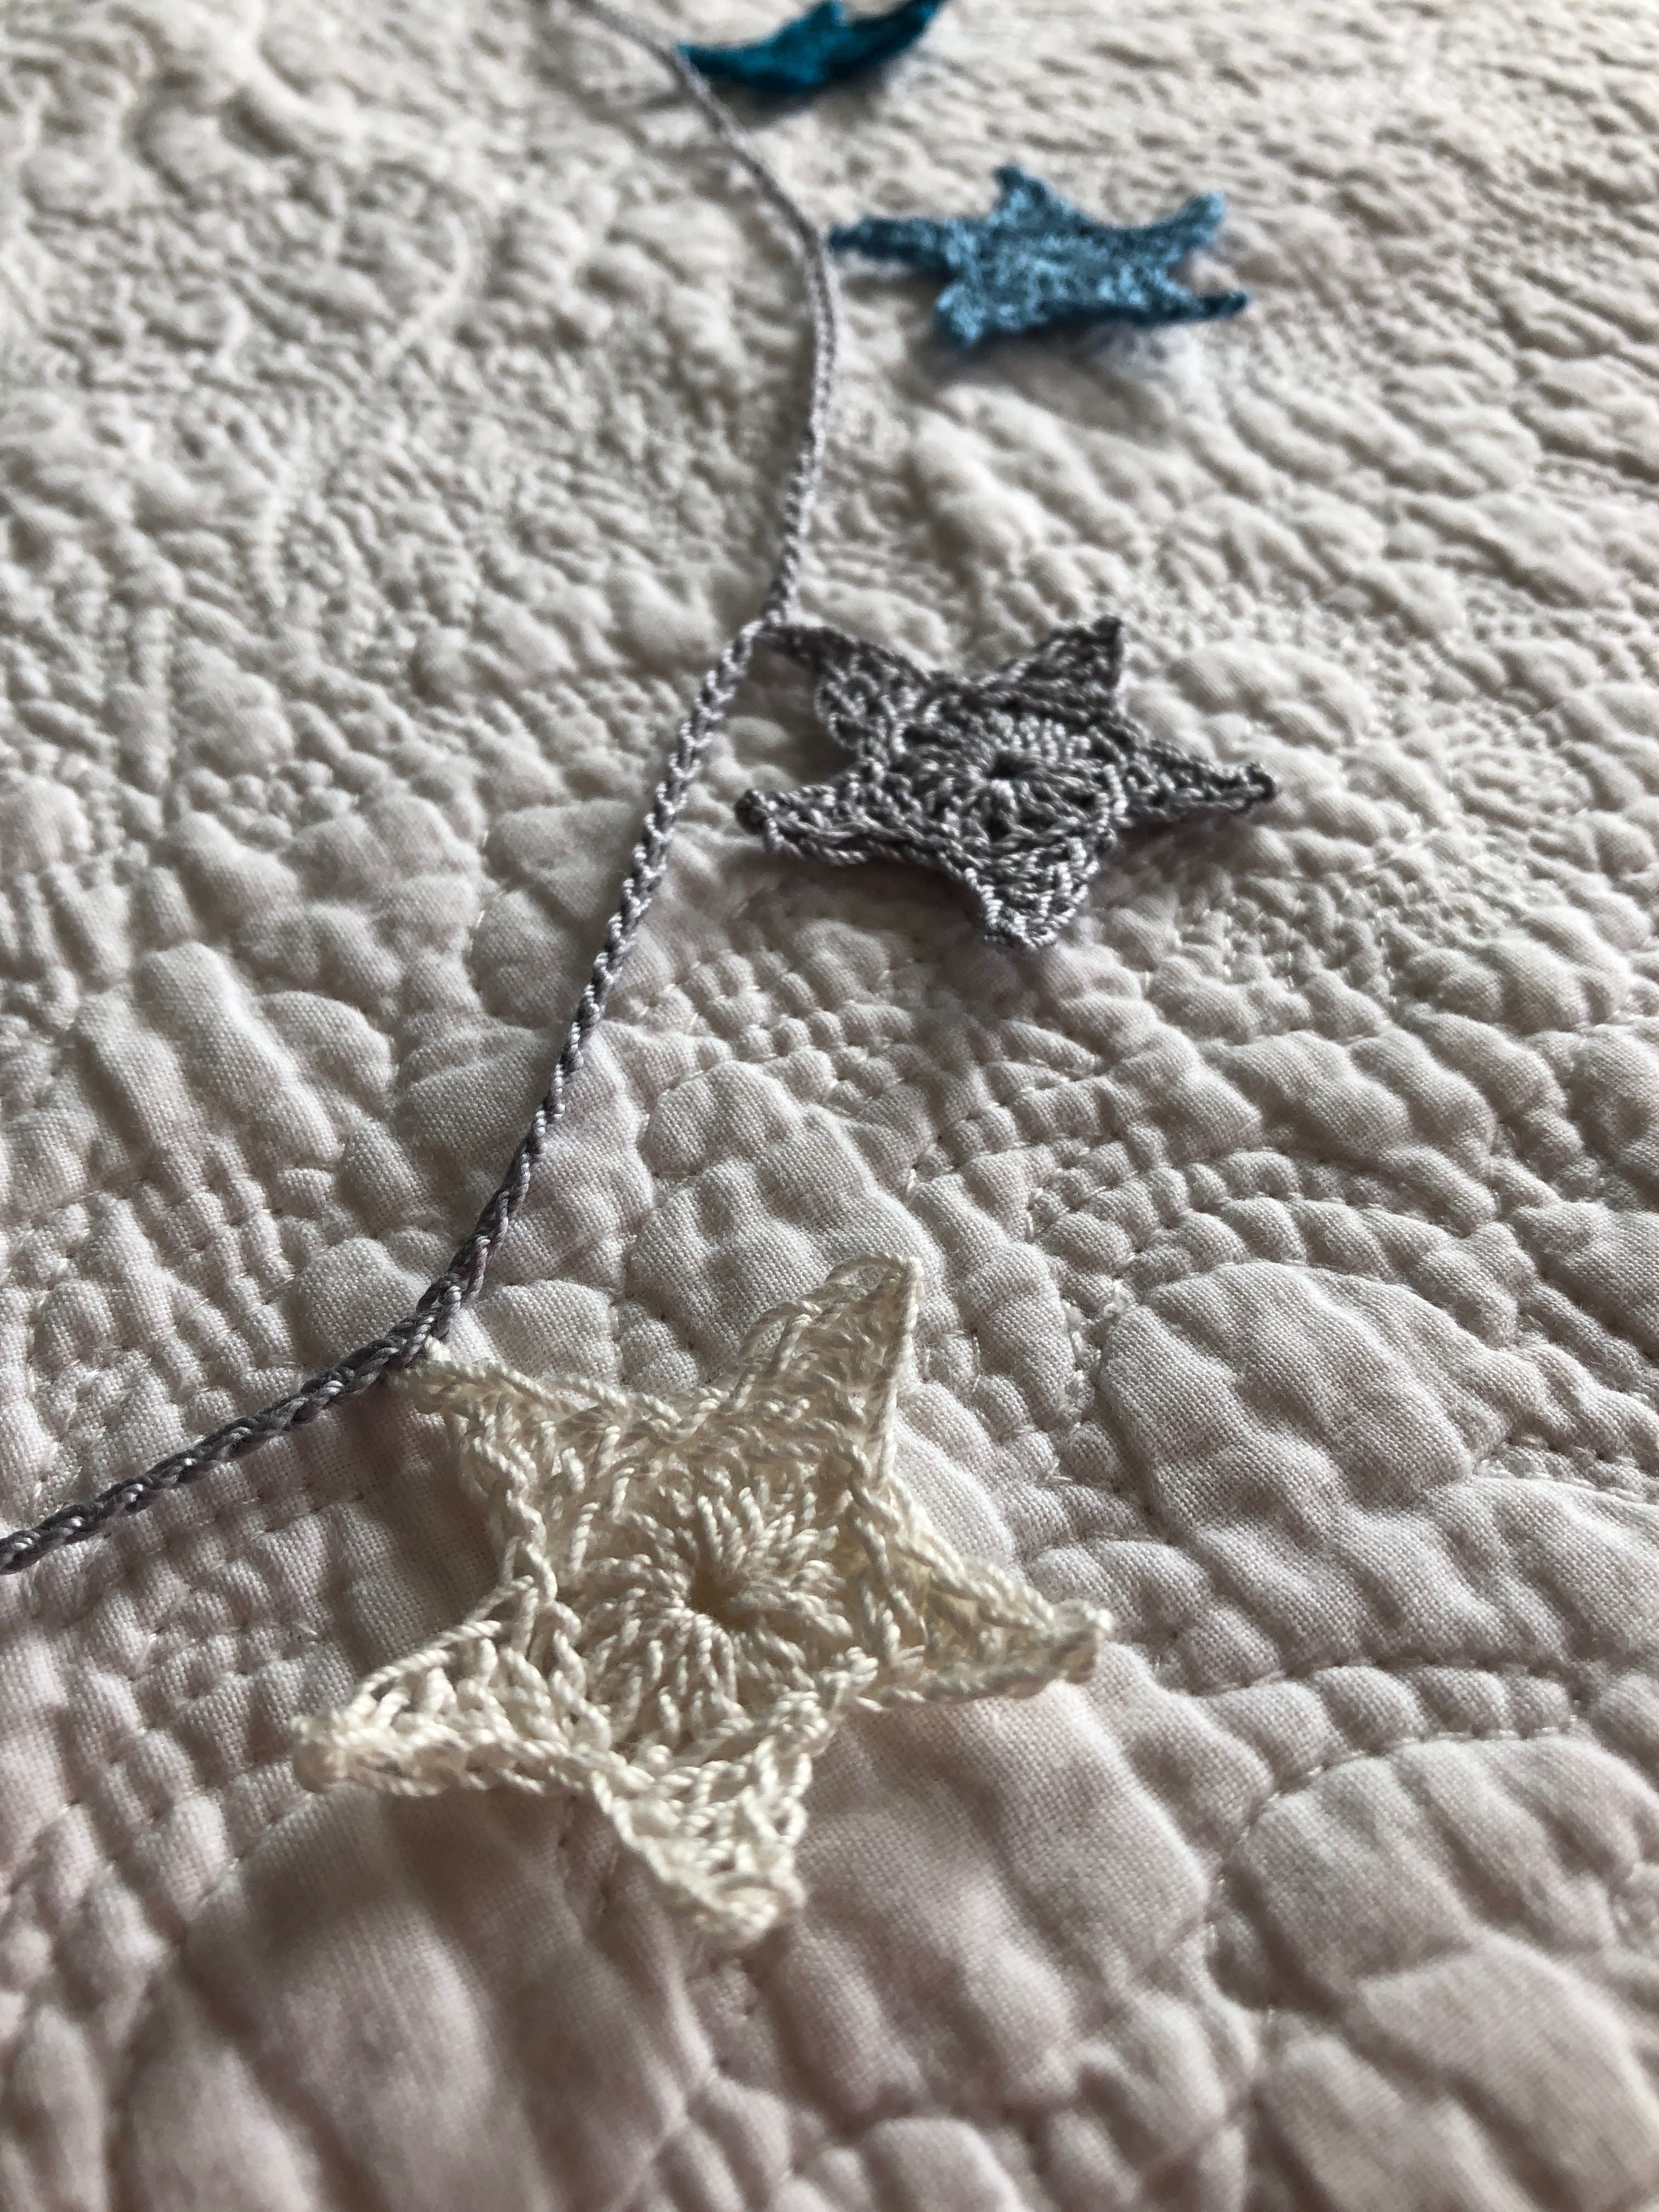 A small hand crocheted cotton star garland in petrol blue, mid blue, grey and white with a grey crocheted cord.